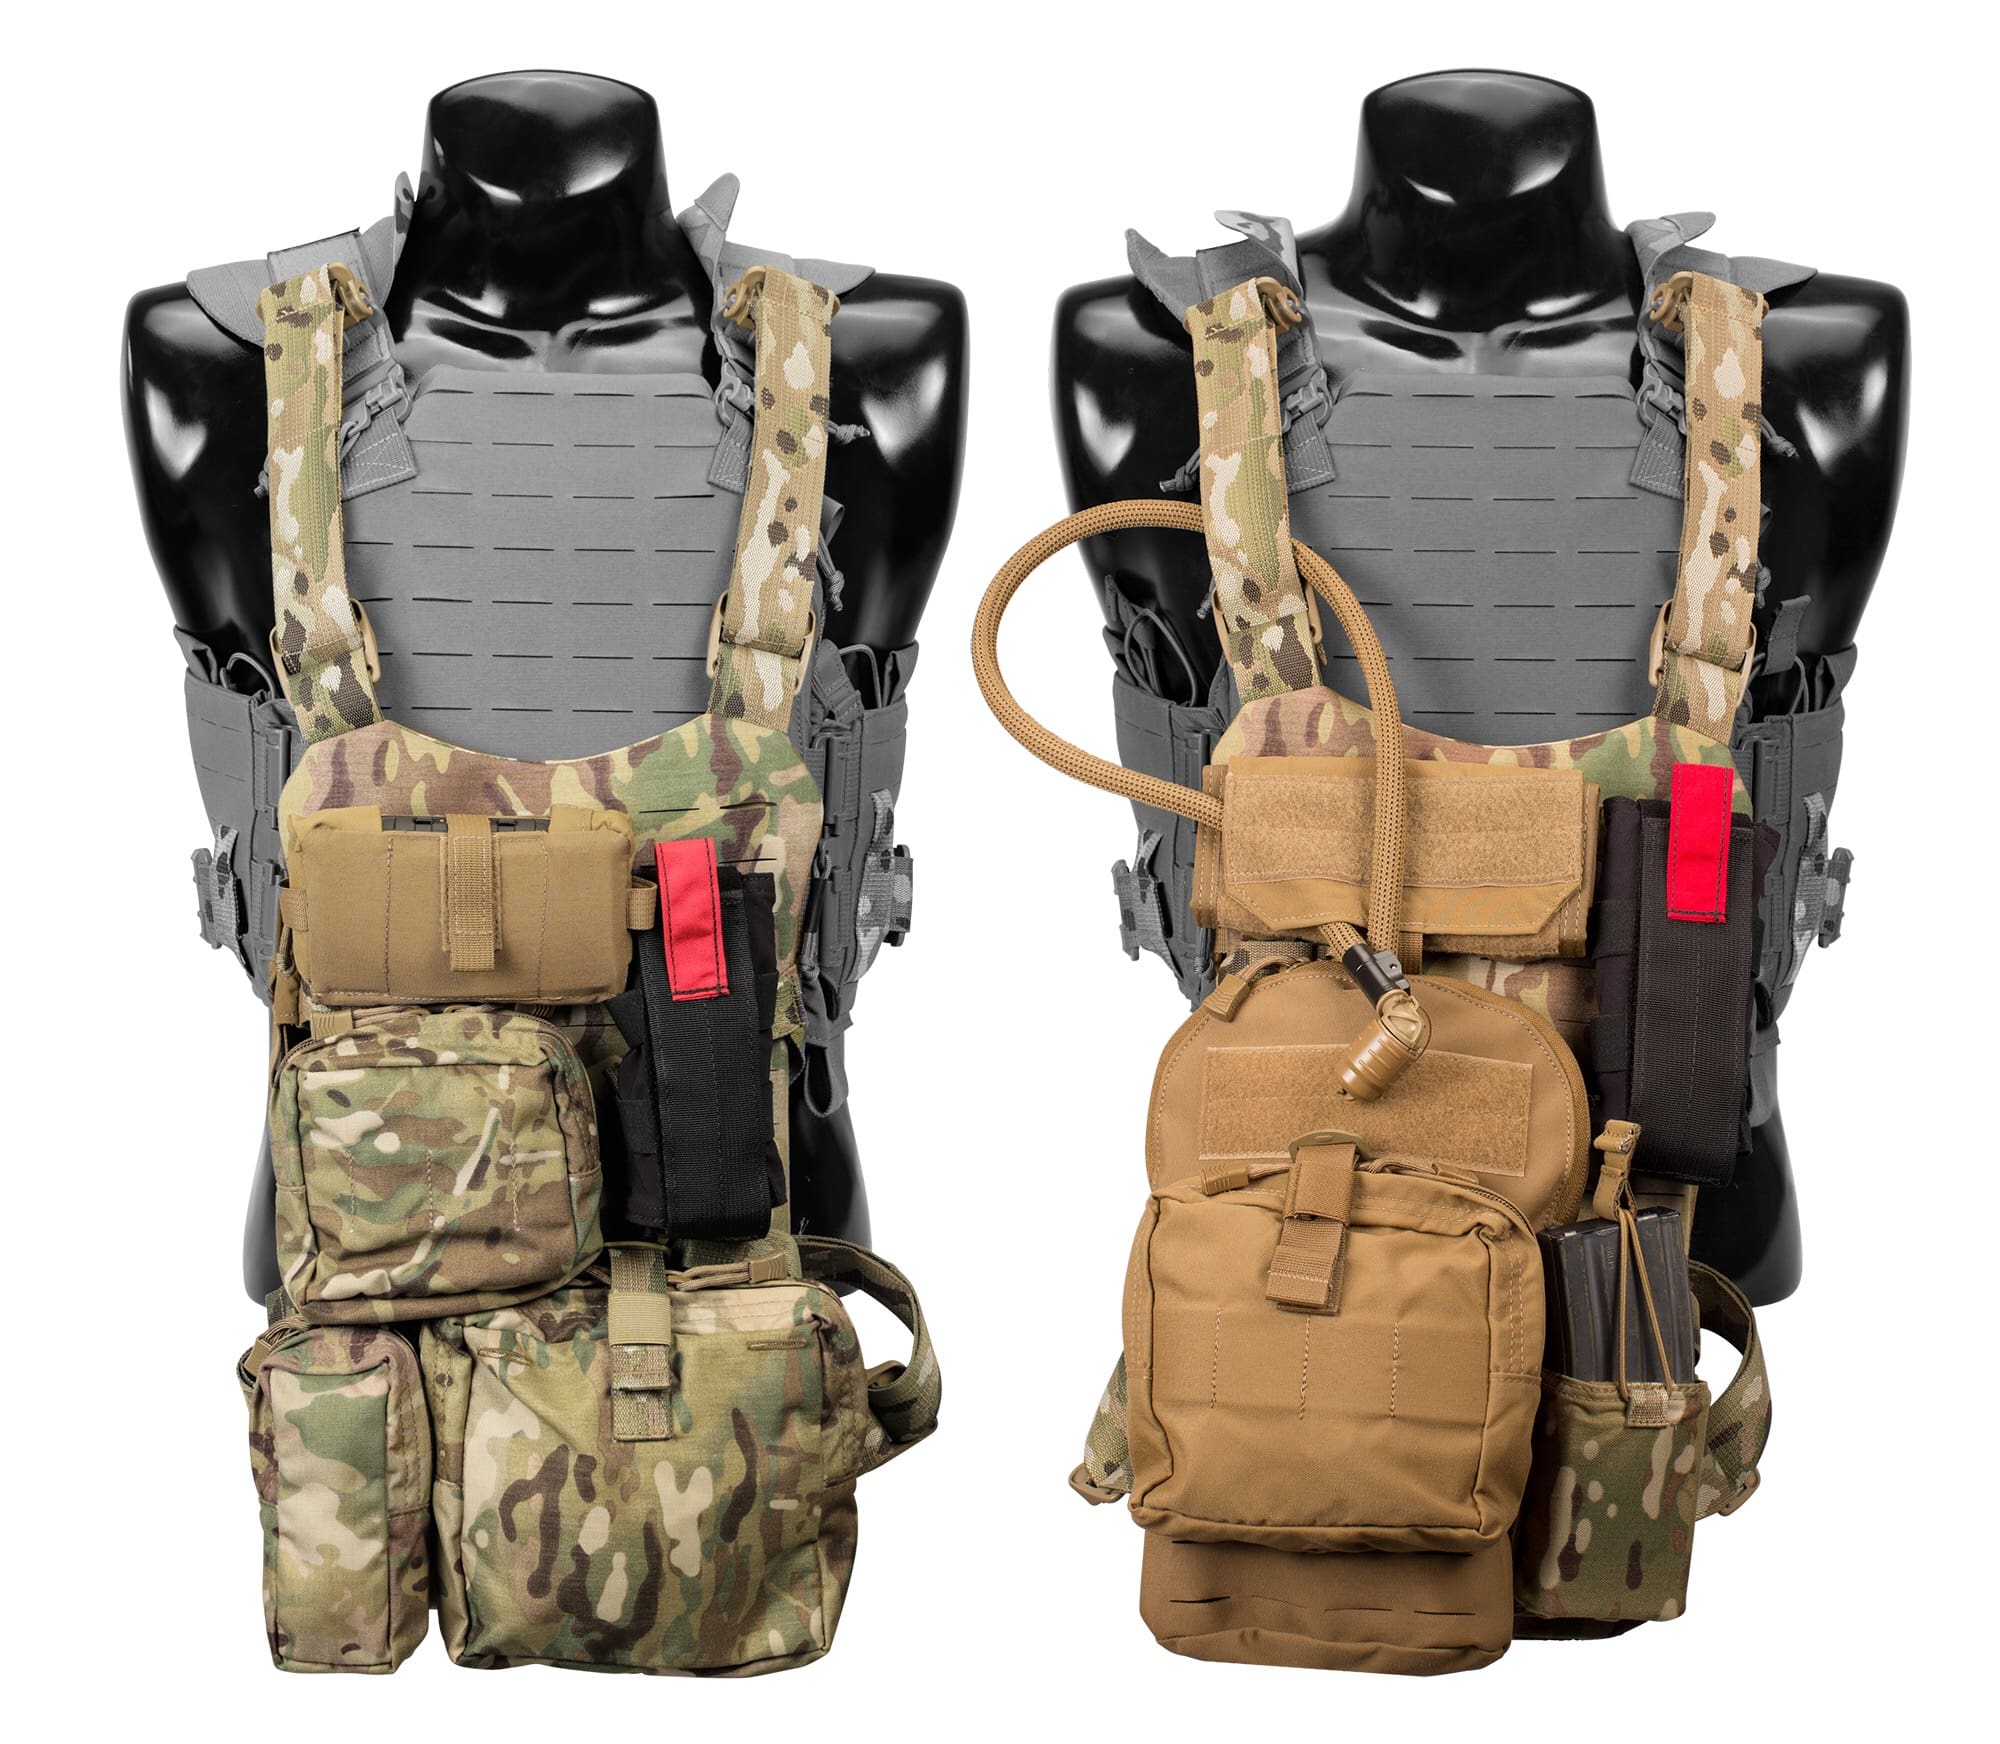 FirstSpear Friday Focus - VEP Modular Panel - Soldier Systems Daily